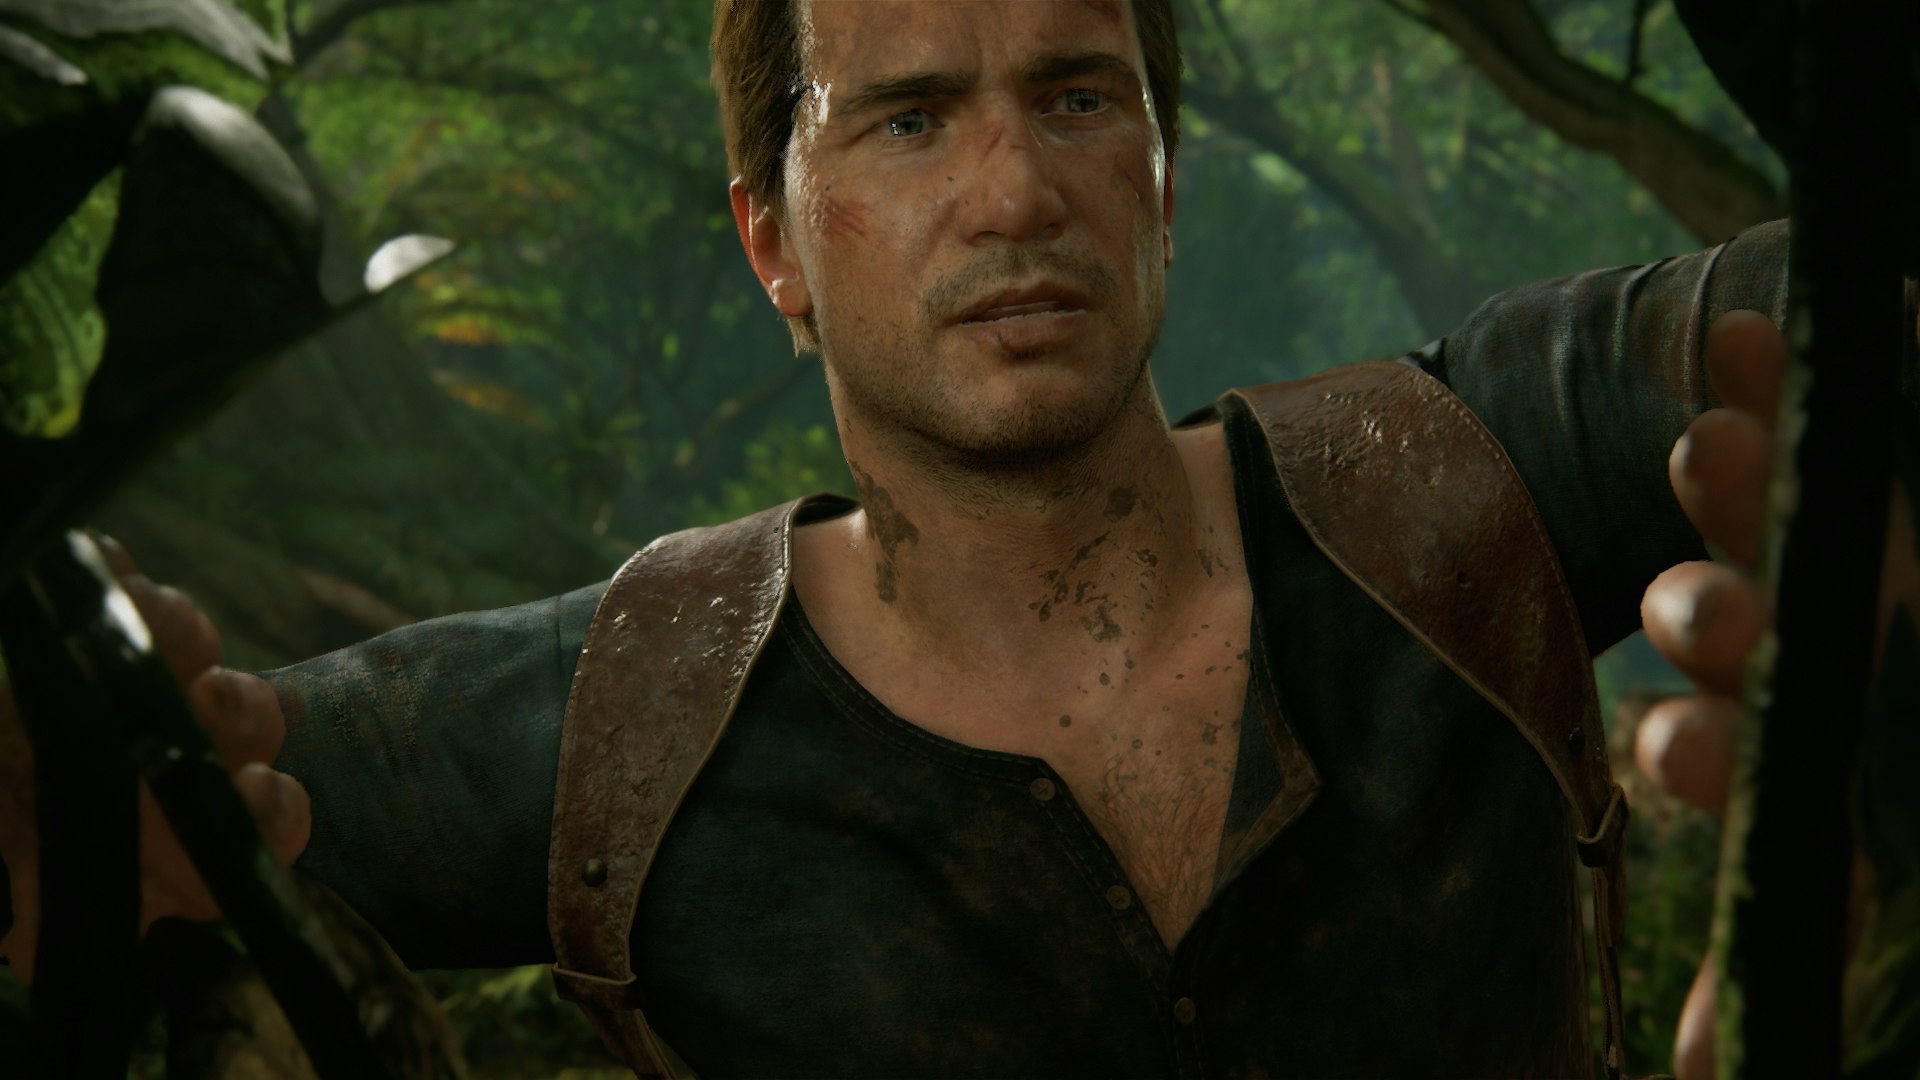 Review: Uncharted 4: A Thief's End